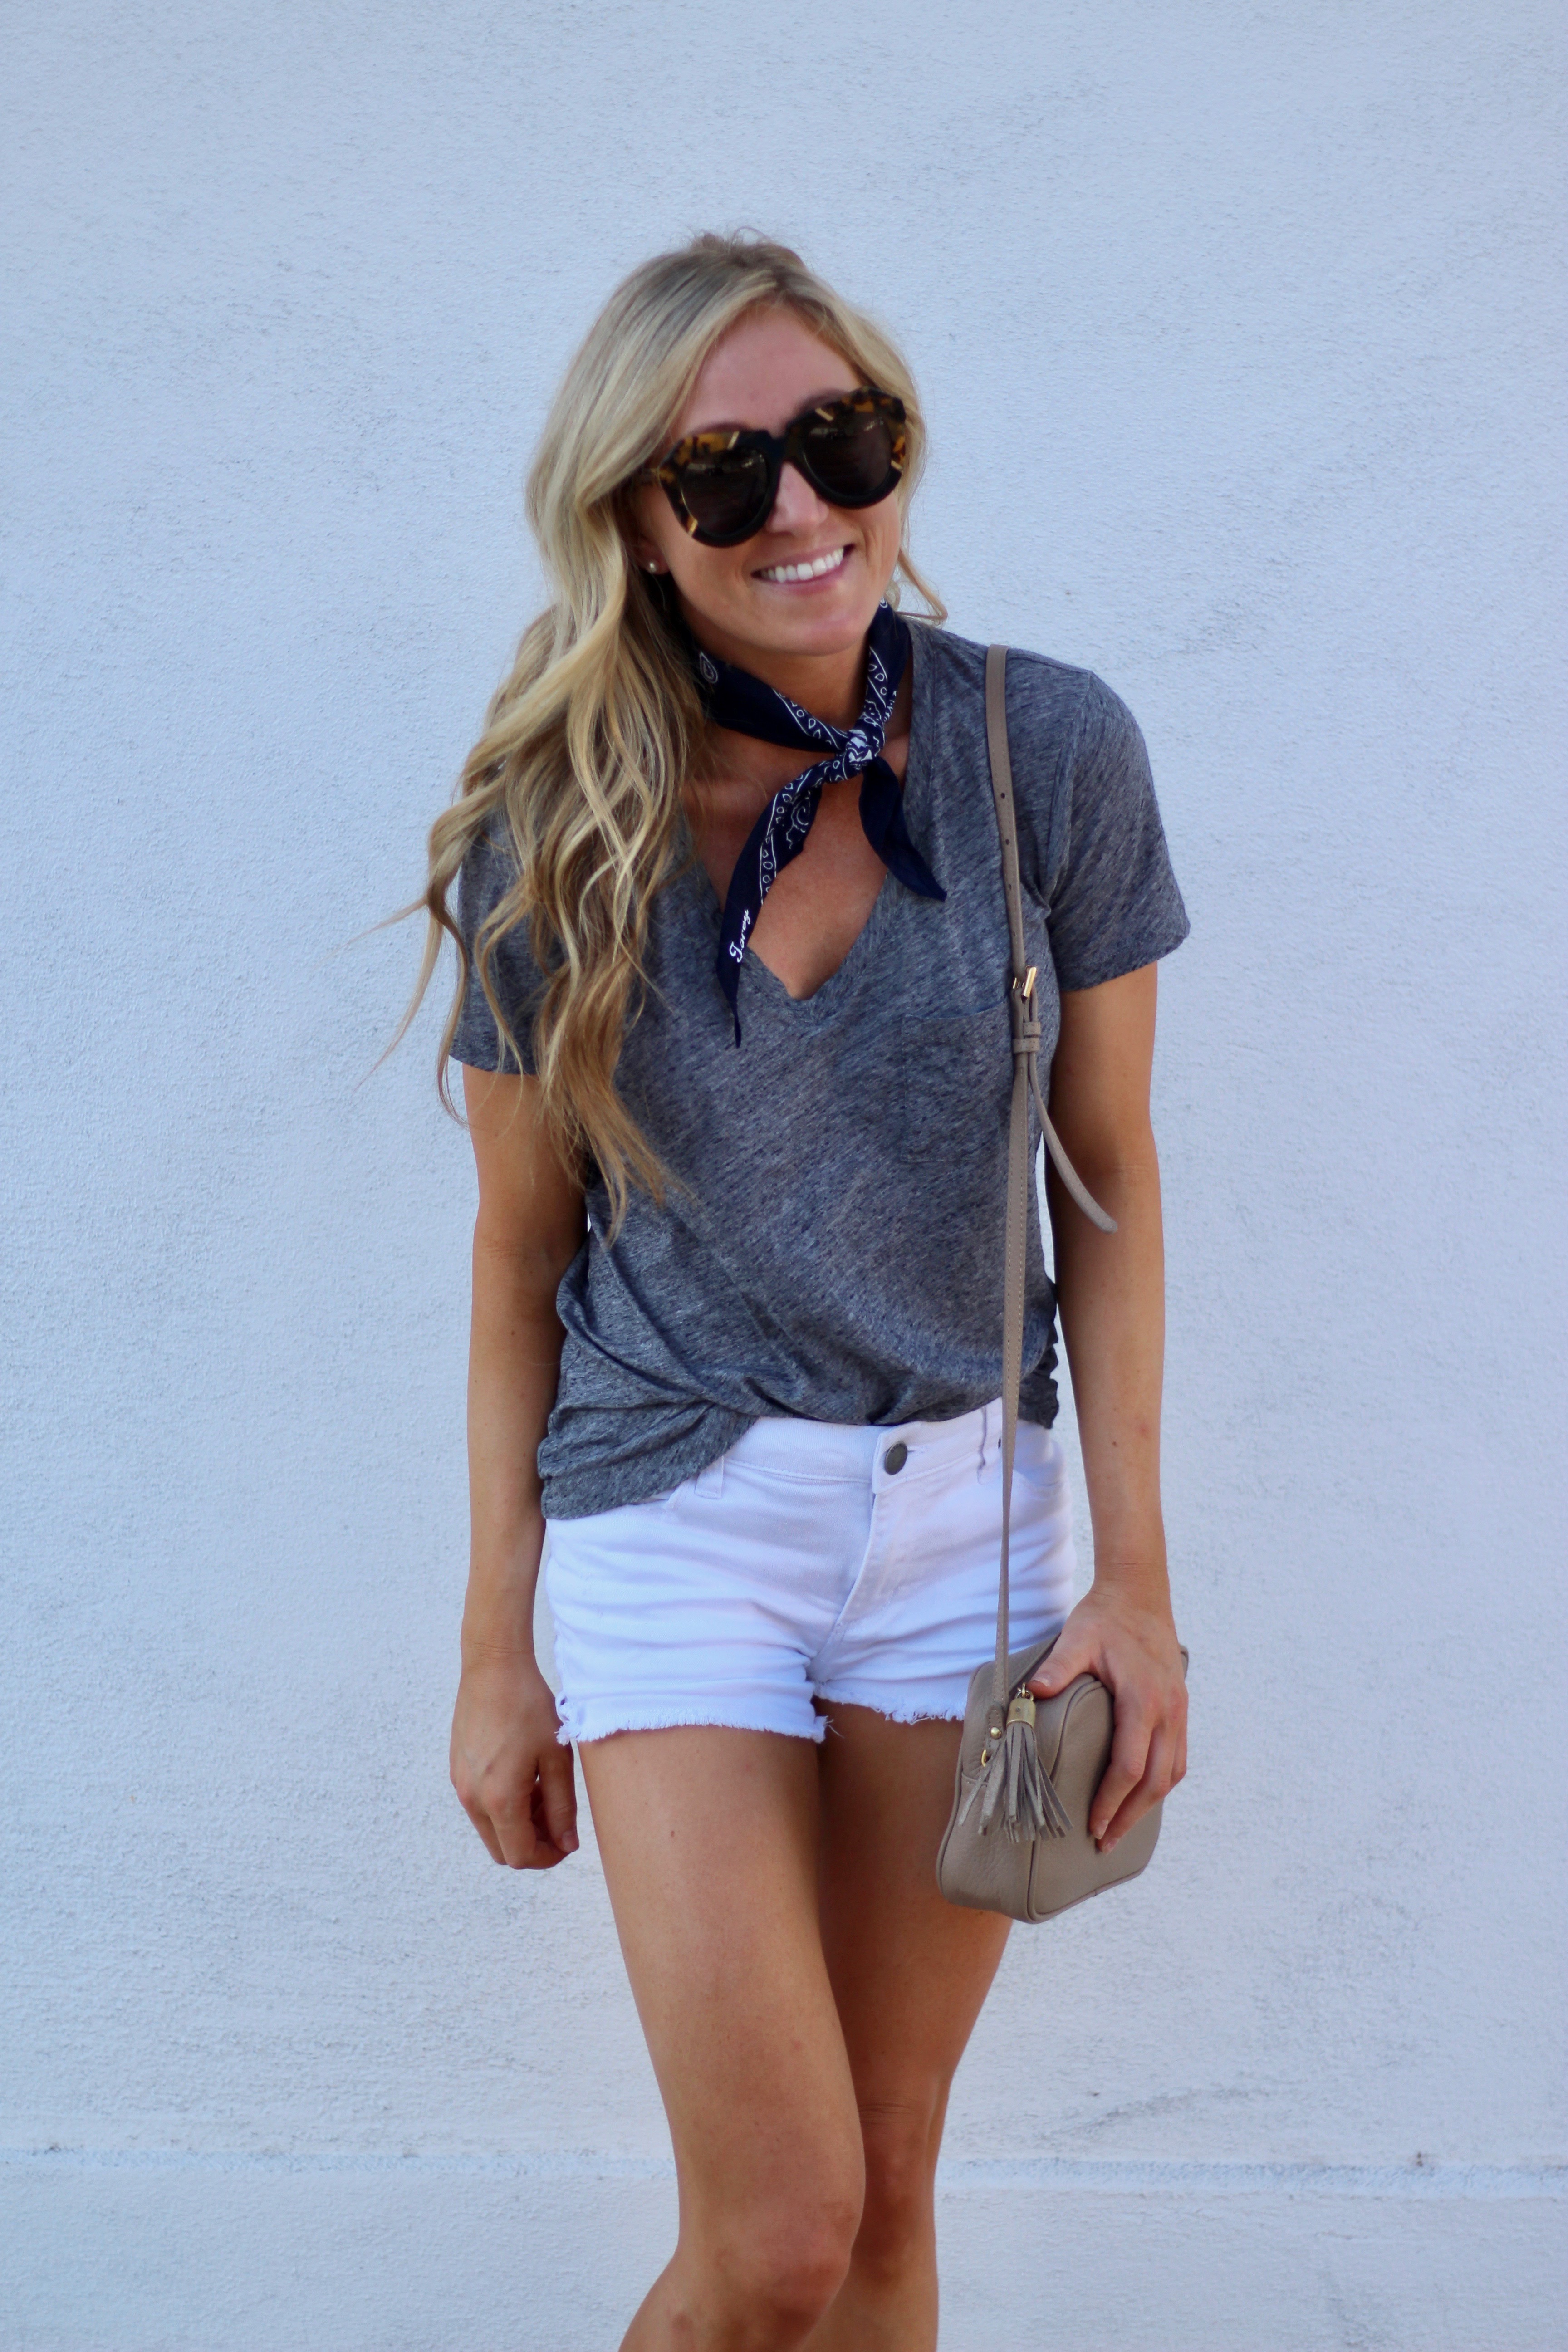 RED WHITE + BLUE OUTFIT INSPO FOR THE 4TH OF JULY - Torey's Treasures